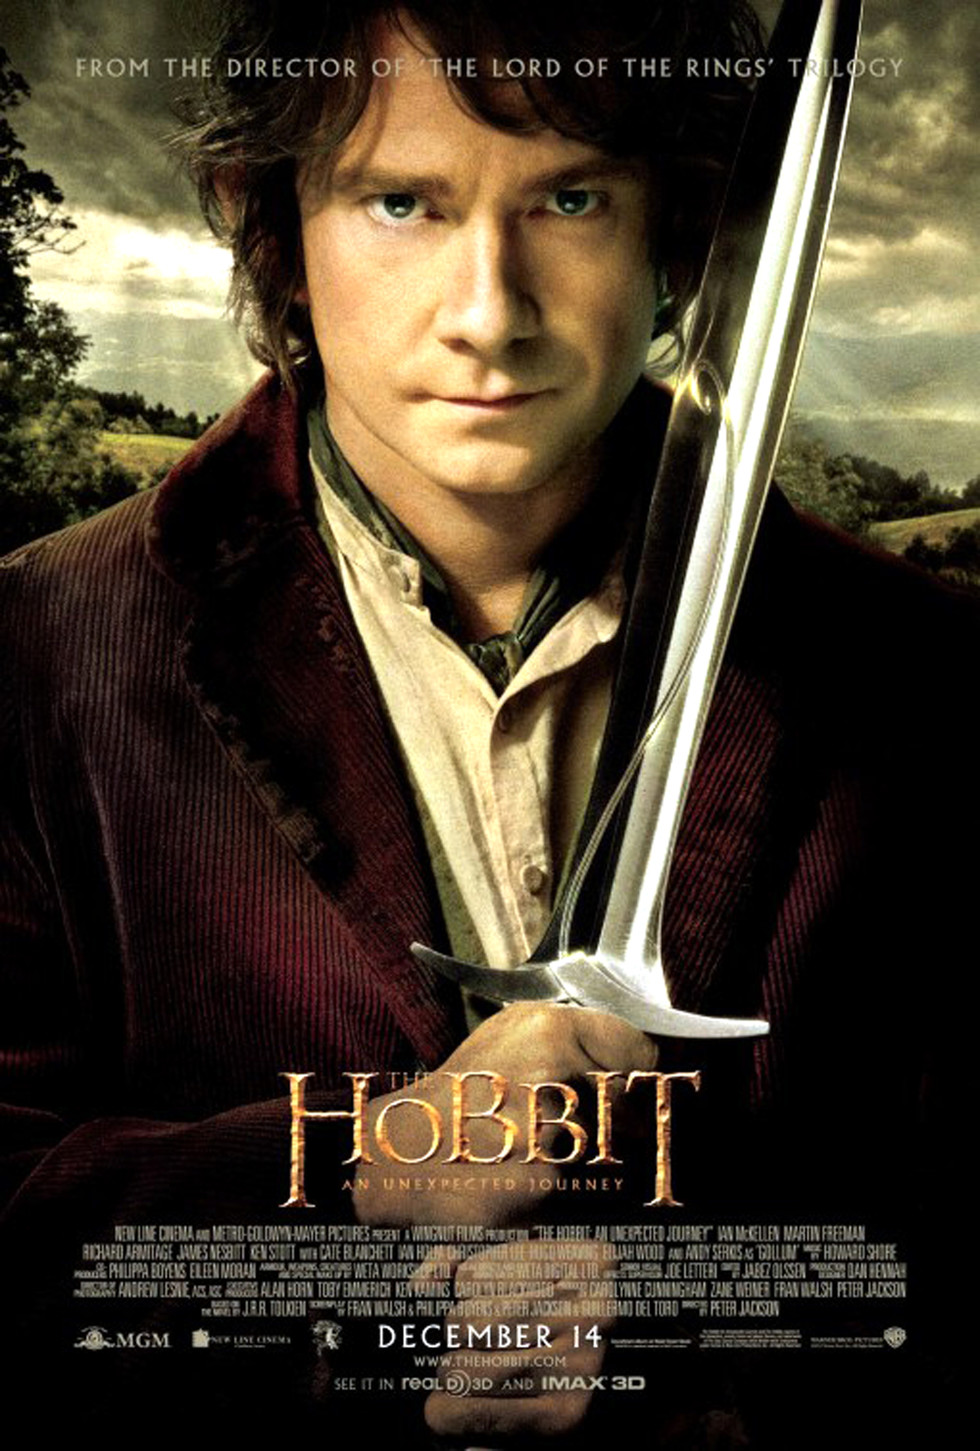 The Hobbit: An Unexpected Journey - Movie Poster #2 (Large)